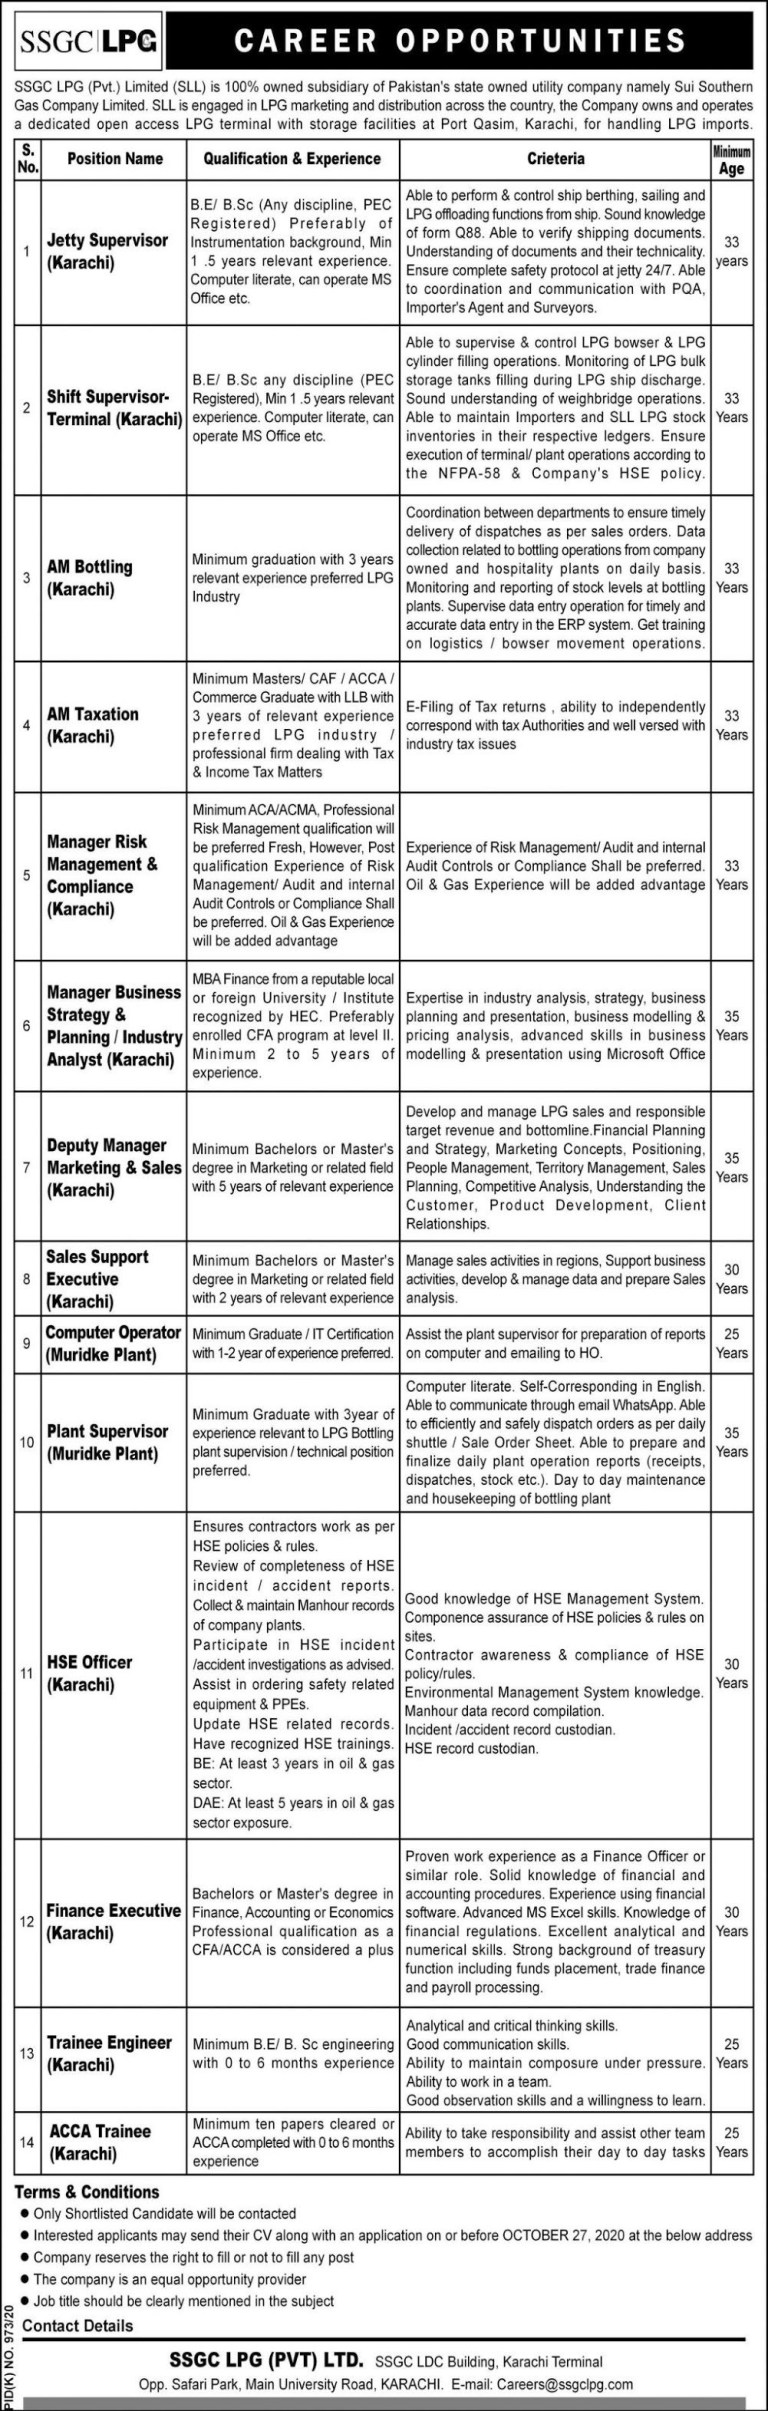 SSGC Jobs October 2020 Trainee Engineers & Others Sui Sourthern Gas Company Limited LPG Latest